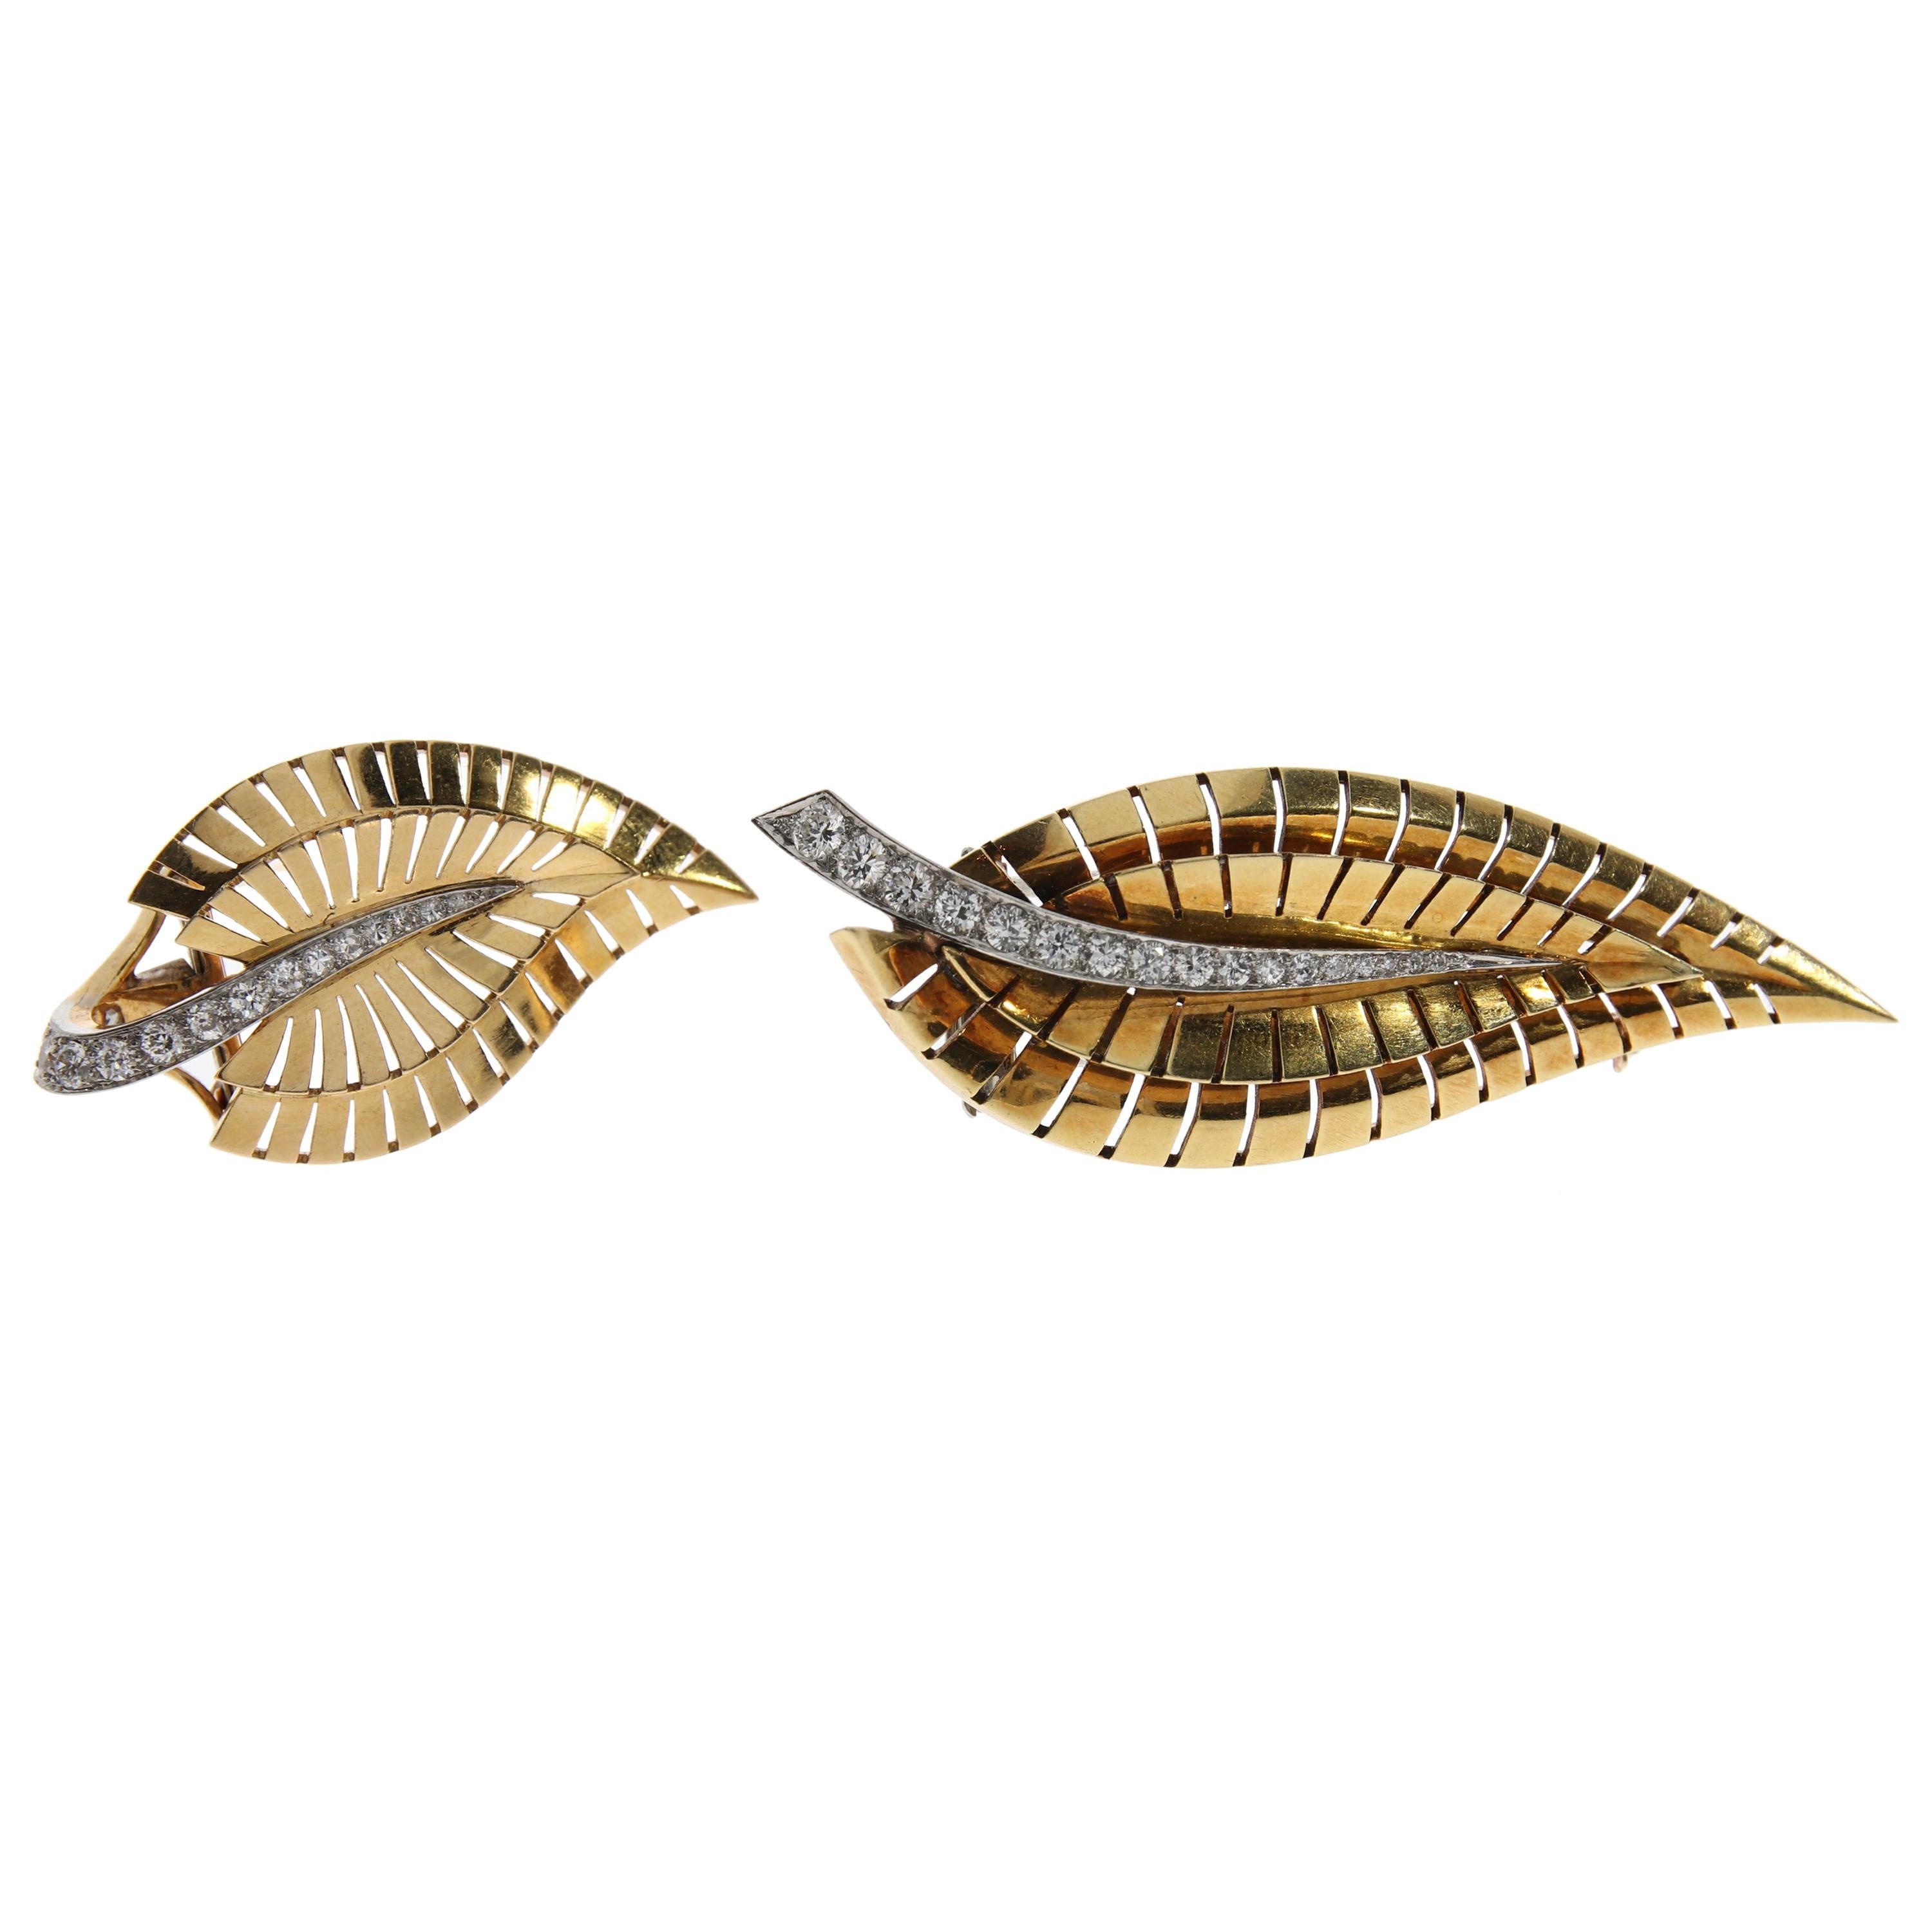 2 Van Cleef & Arpels Leaf Brooch Set, with Diamonds and in 18 KT gold  For Sale